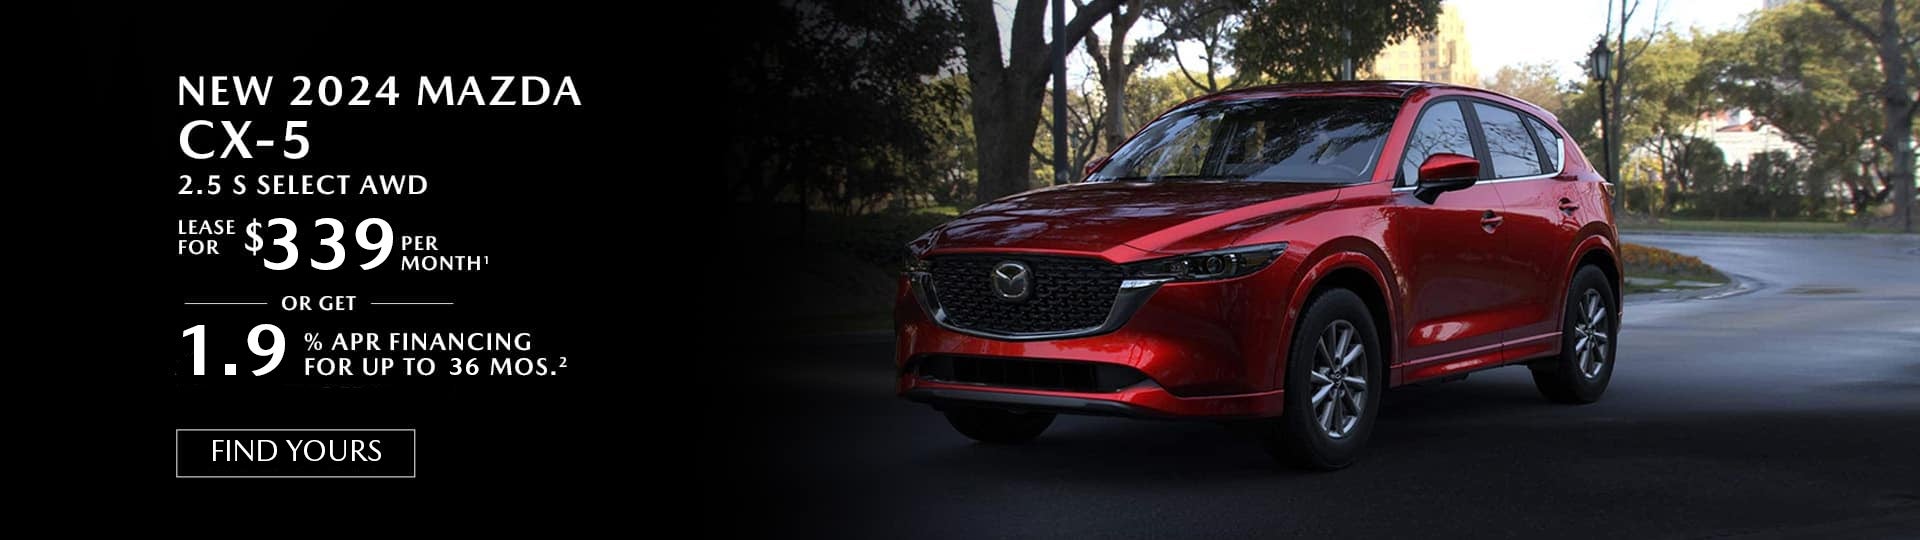 2024 Mazda CX5 special offers